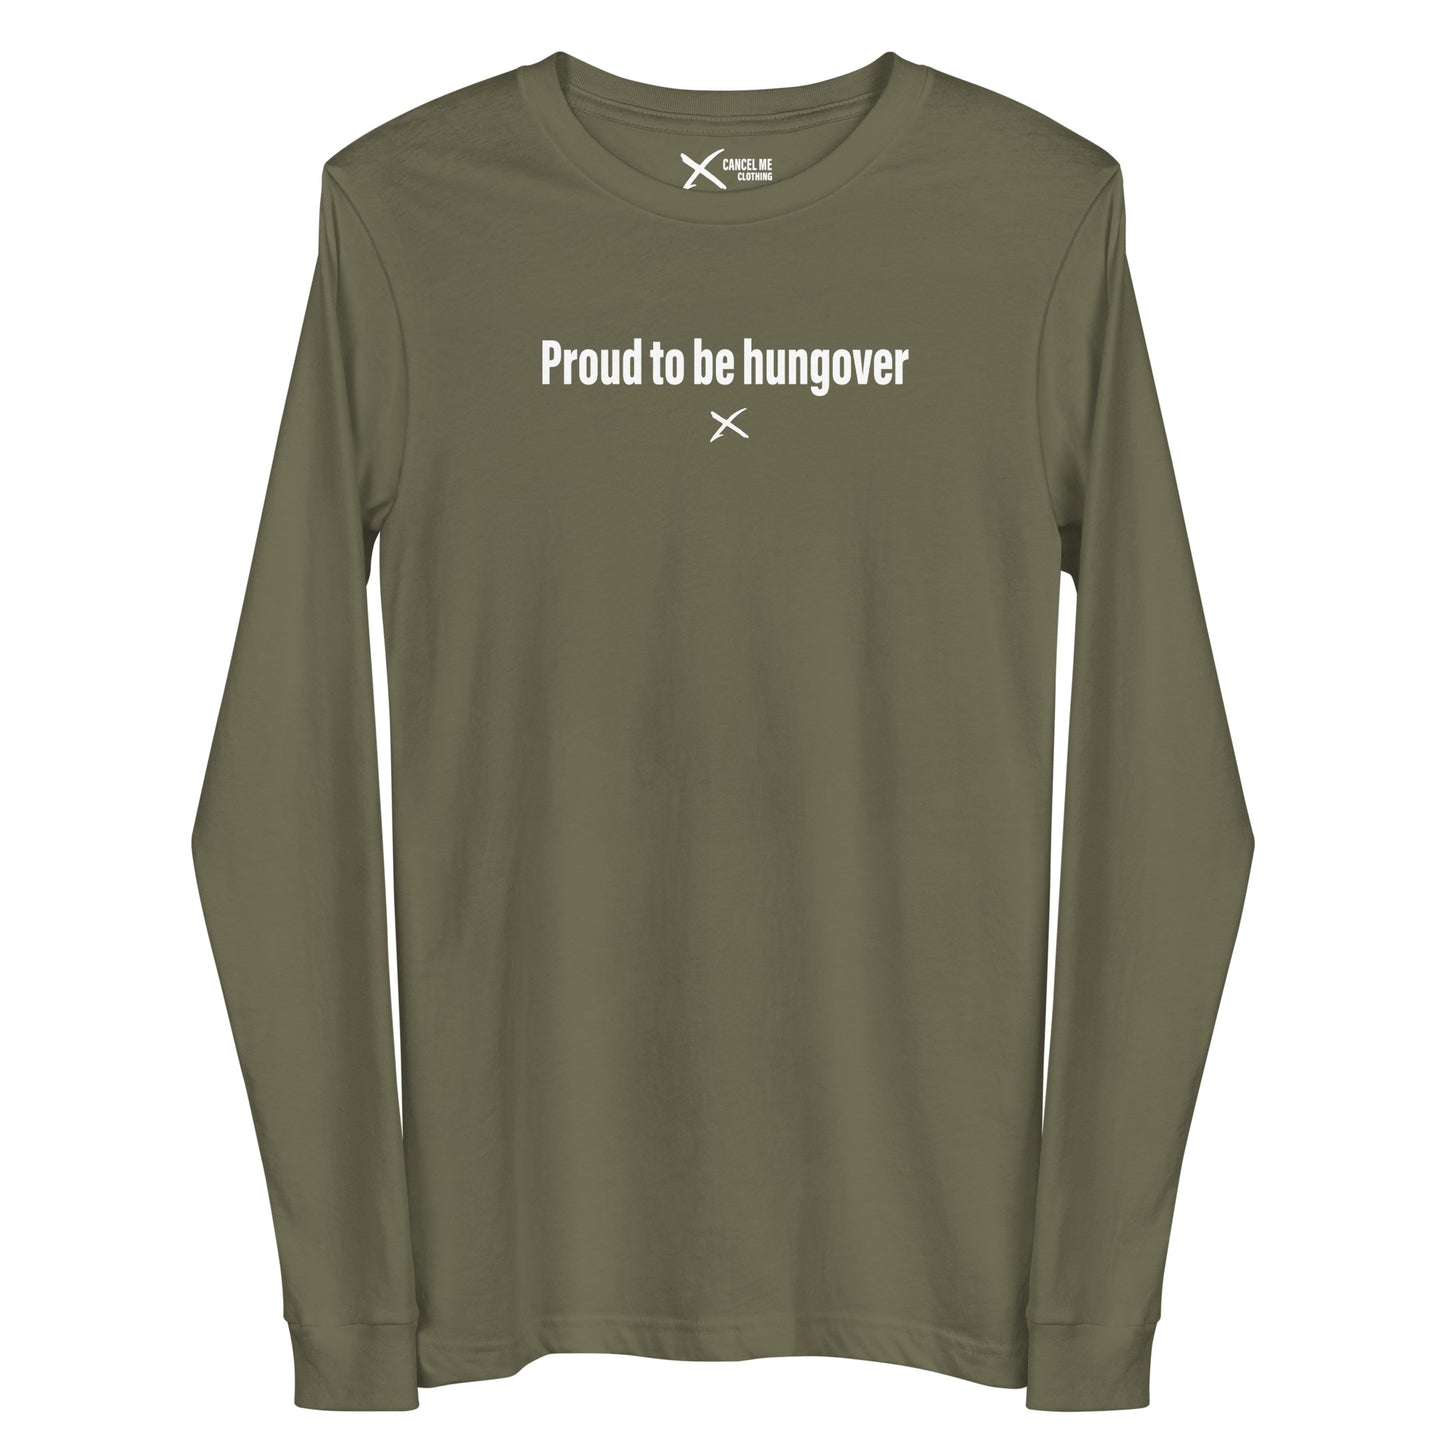 Proud to be hungover - Longsleeve